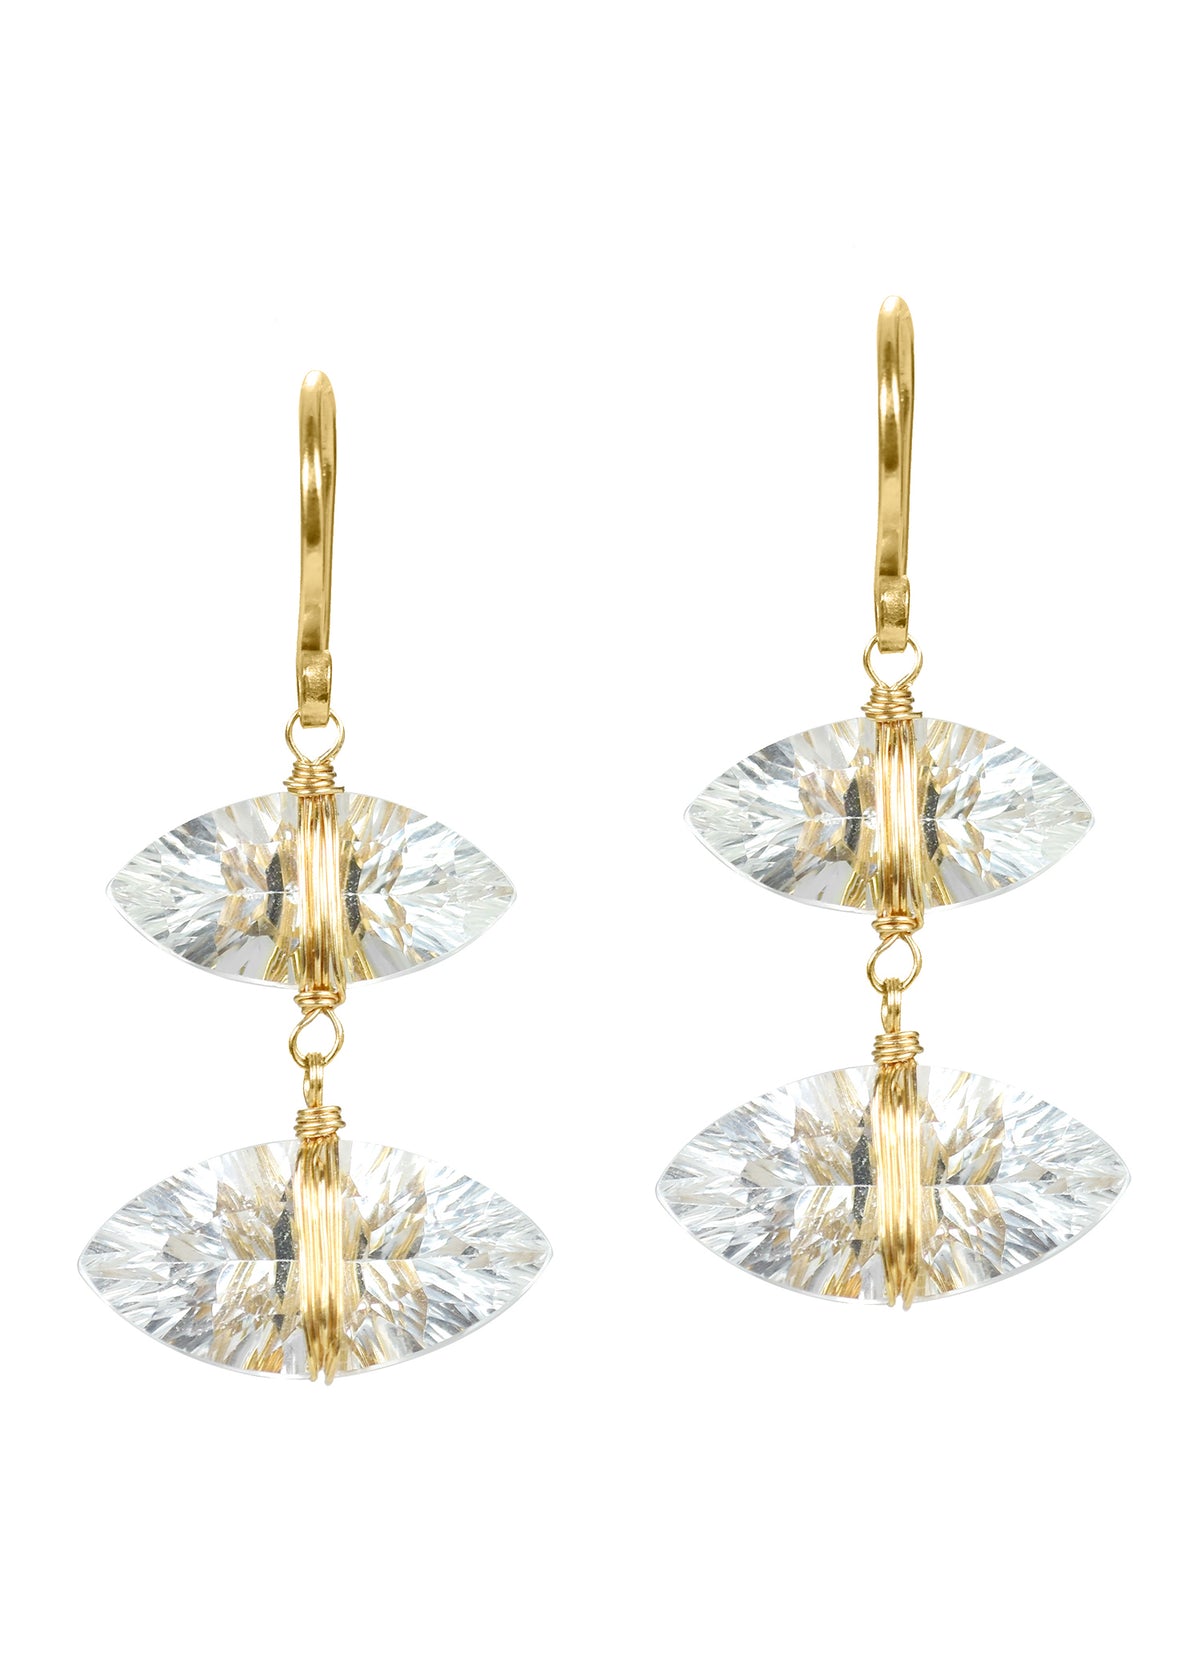 White Topaz 14k gold Earrings measure 1-5/16&quot; in length (including the ear wires) and 5/8&quot; in width at the widest point Handmade in our Los Angeles studio